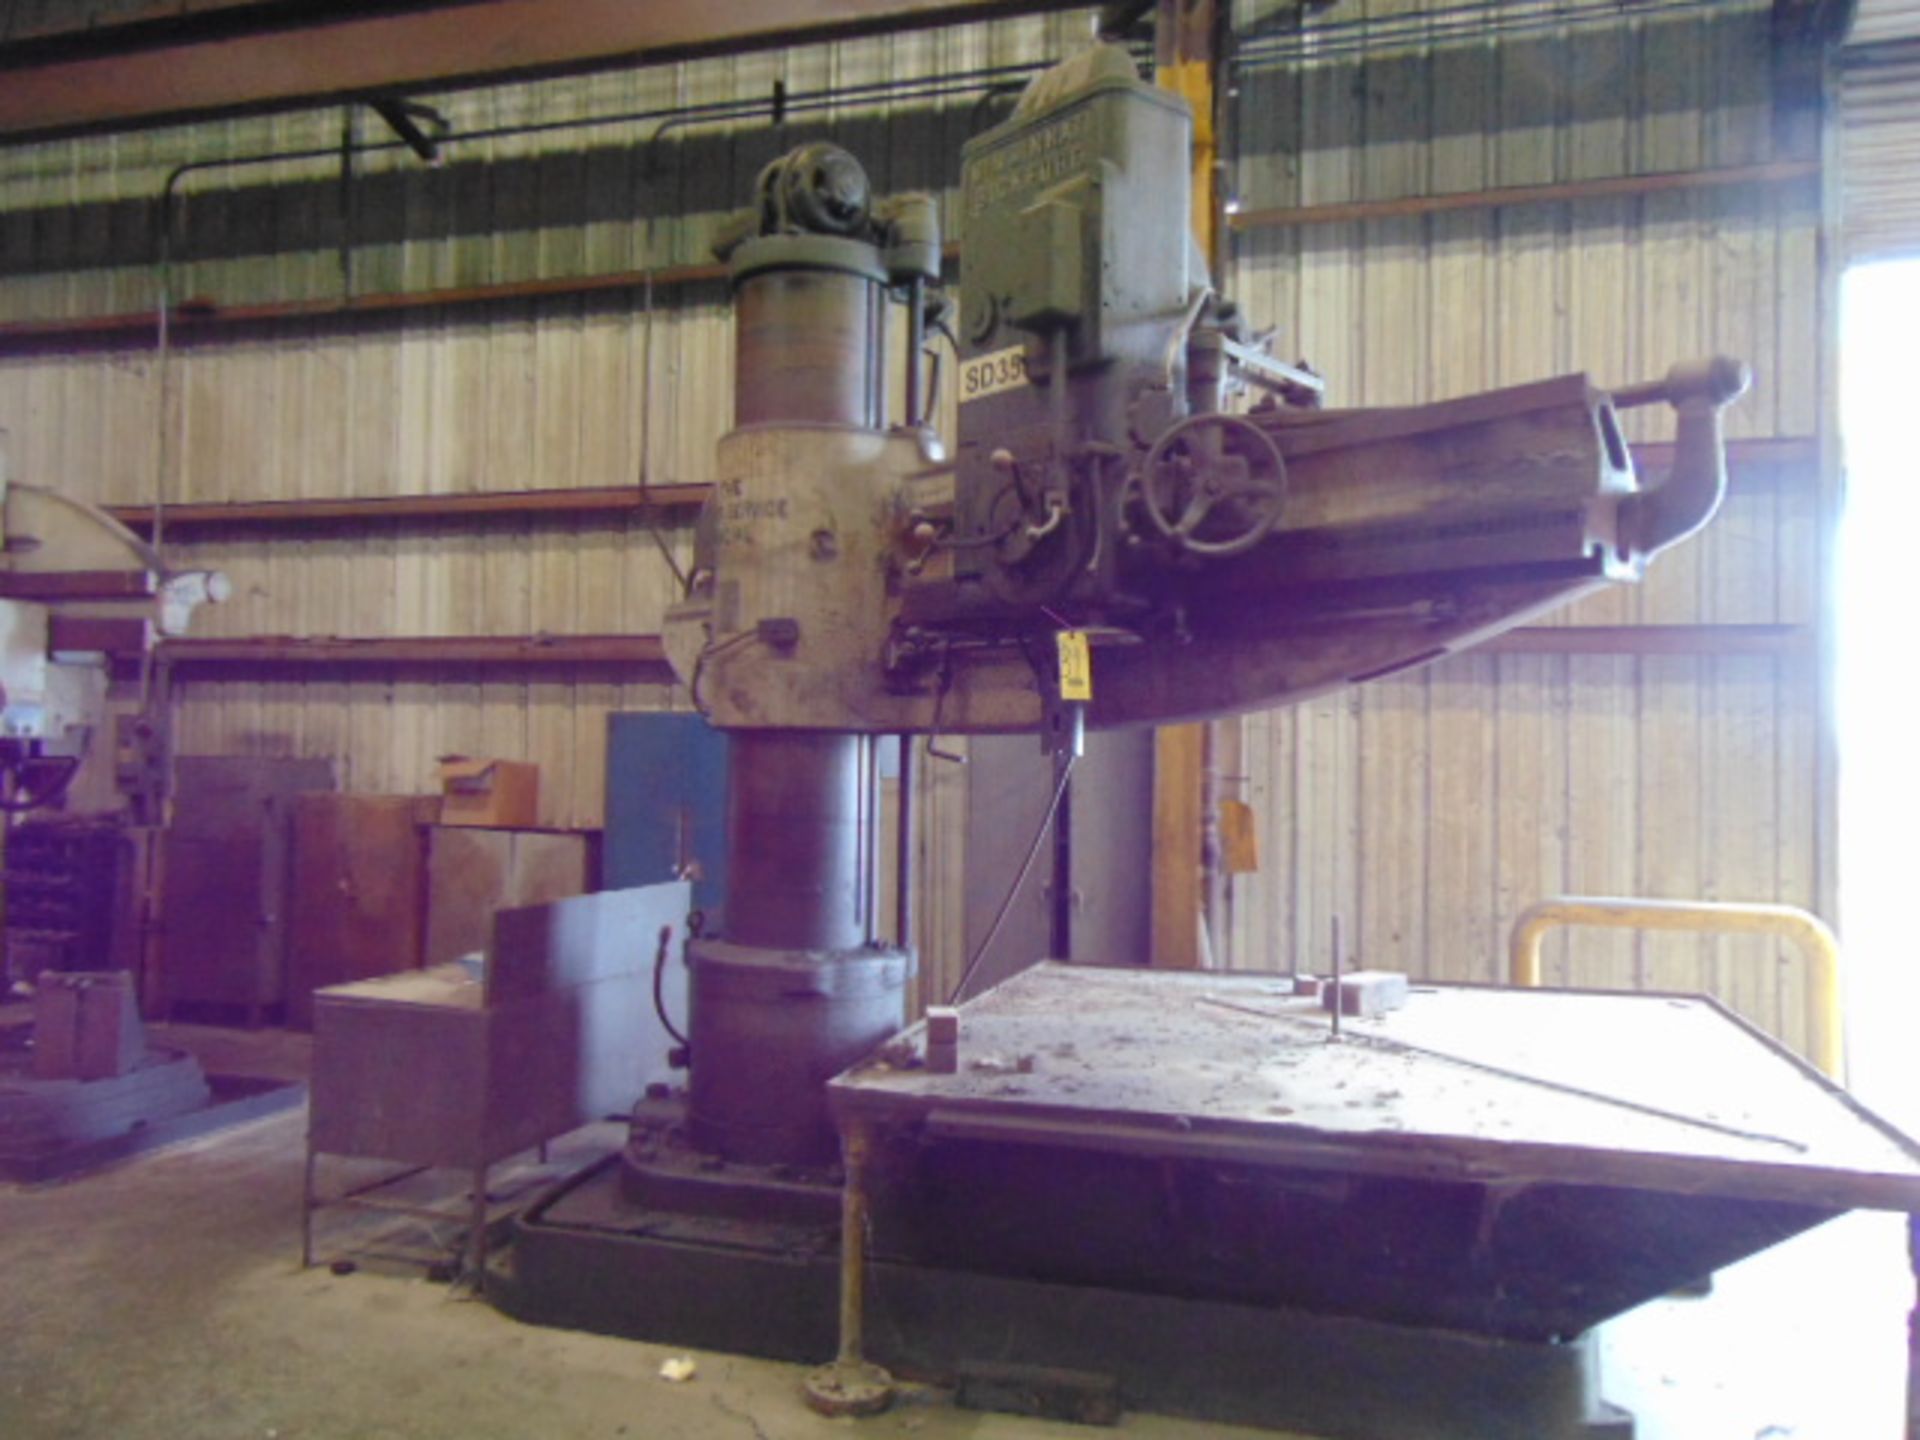 RADIAL ARM DRILL, CINCINNATI BICKFORD 6' X 19", pwr. clamp, feed and elevation, S/N 6E-493 (